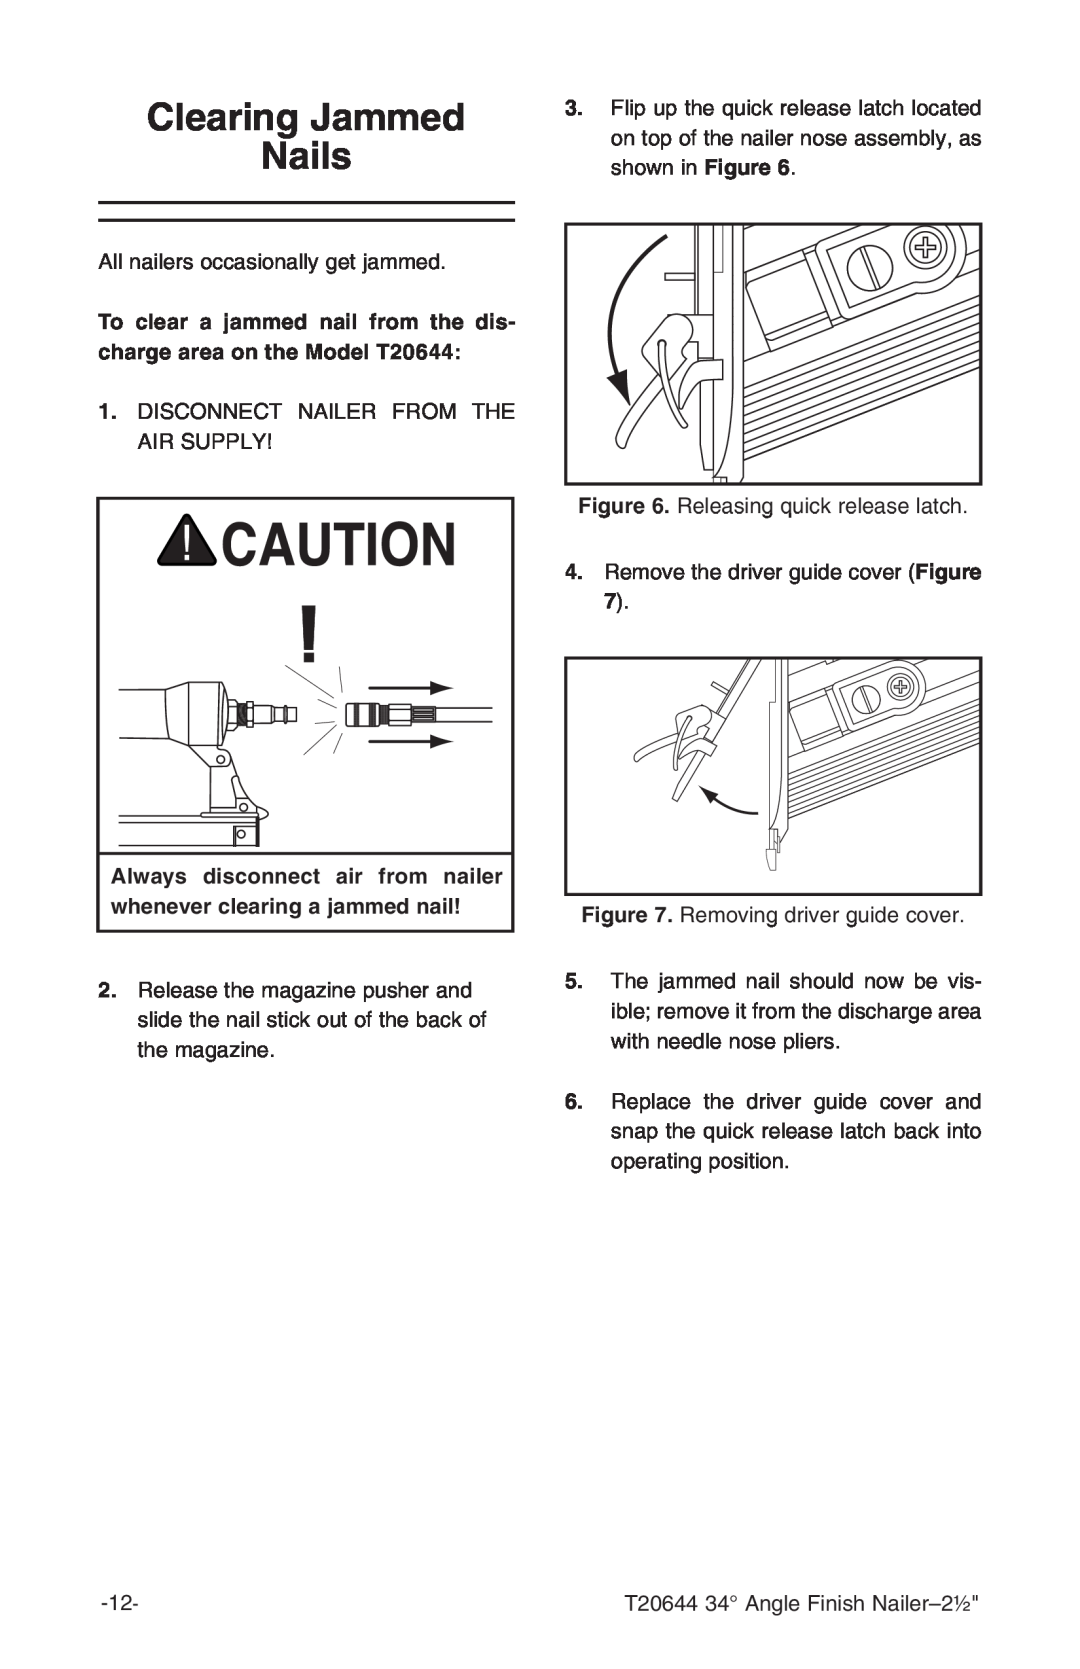 Grizzly instruction manual Clearing Jammed Nails, To clear a jammed nail from the dis- charge area on the Model T20644 